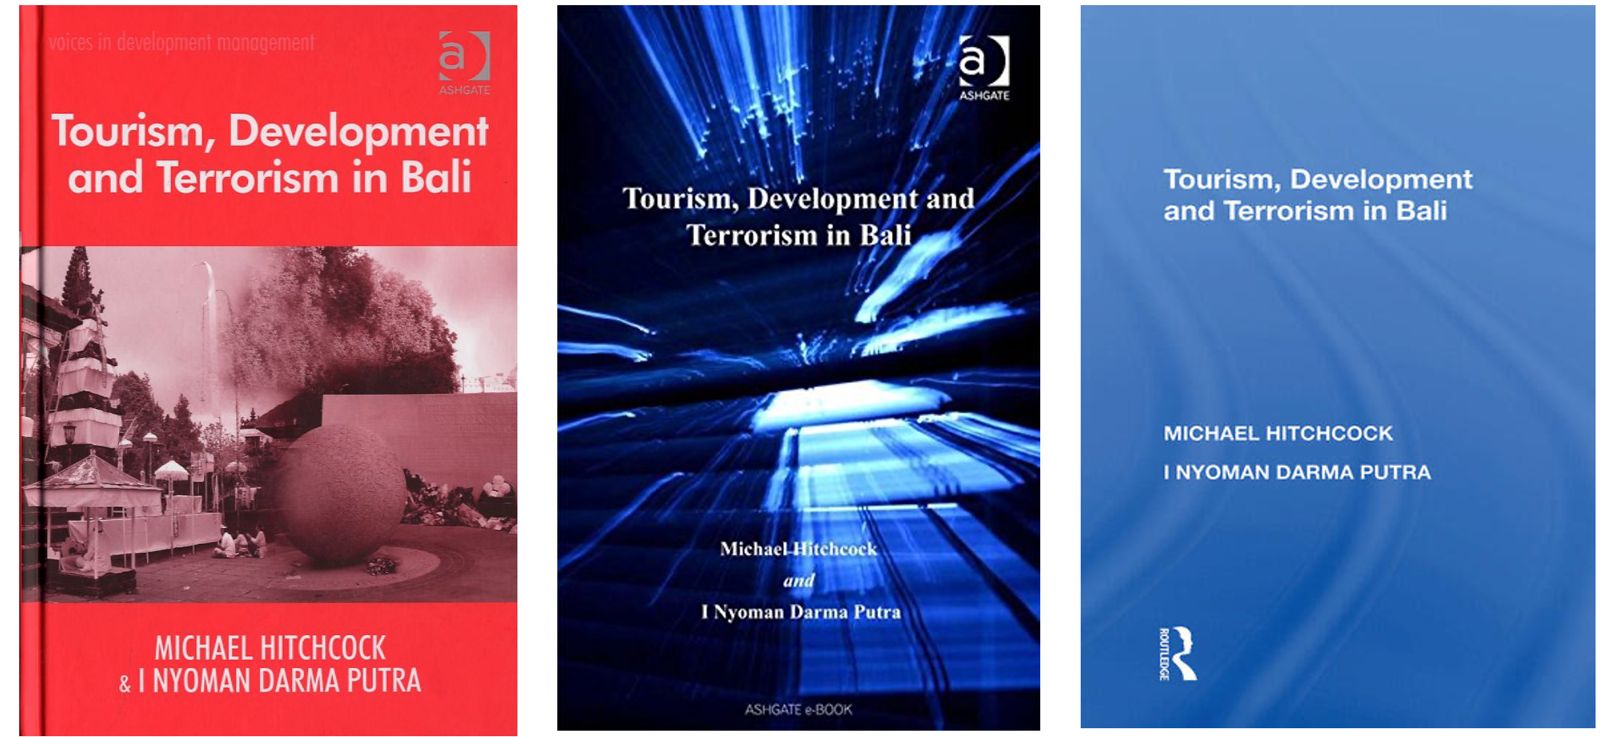 Published in three editions